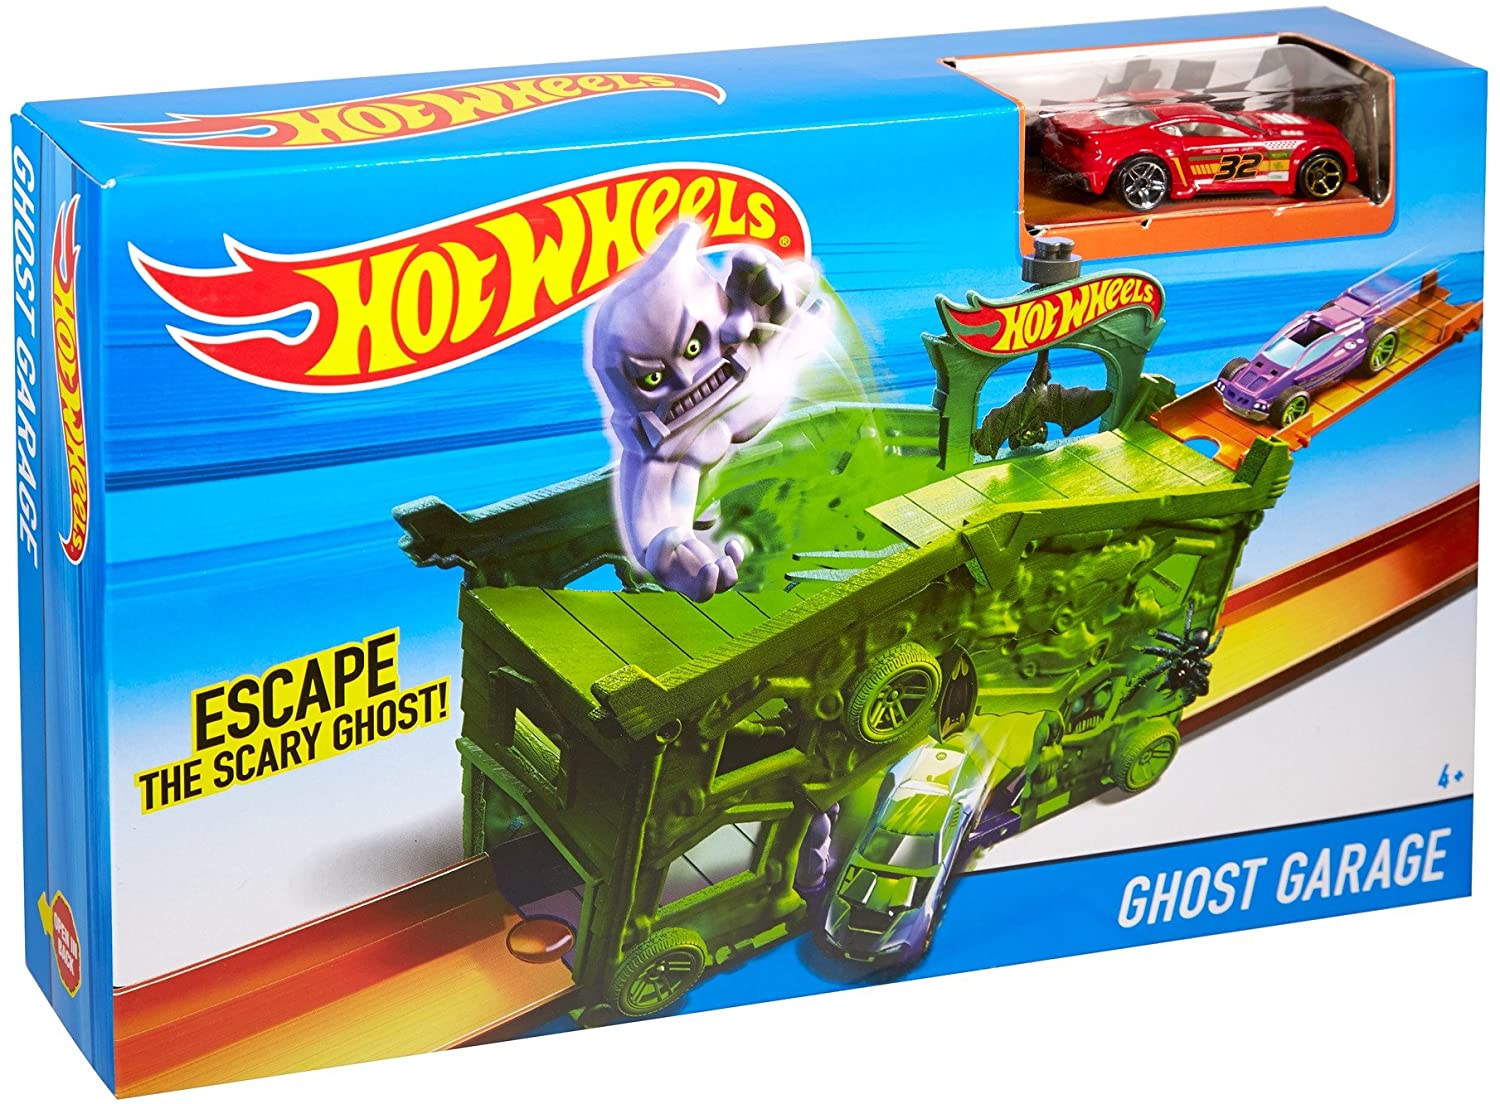 Hot Wheels Ghost Garage Fold-Out Playset (Includes One Vehicle)